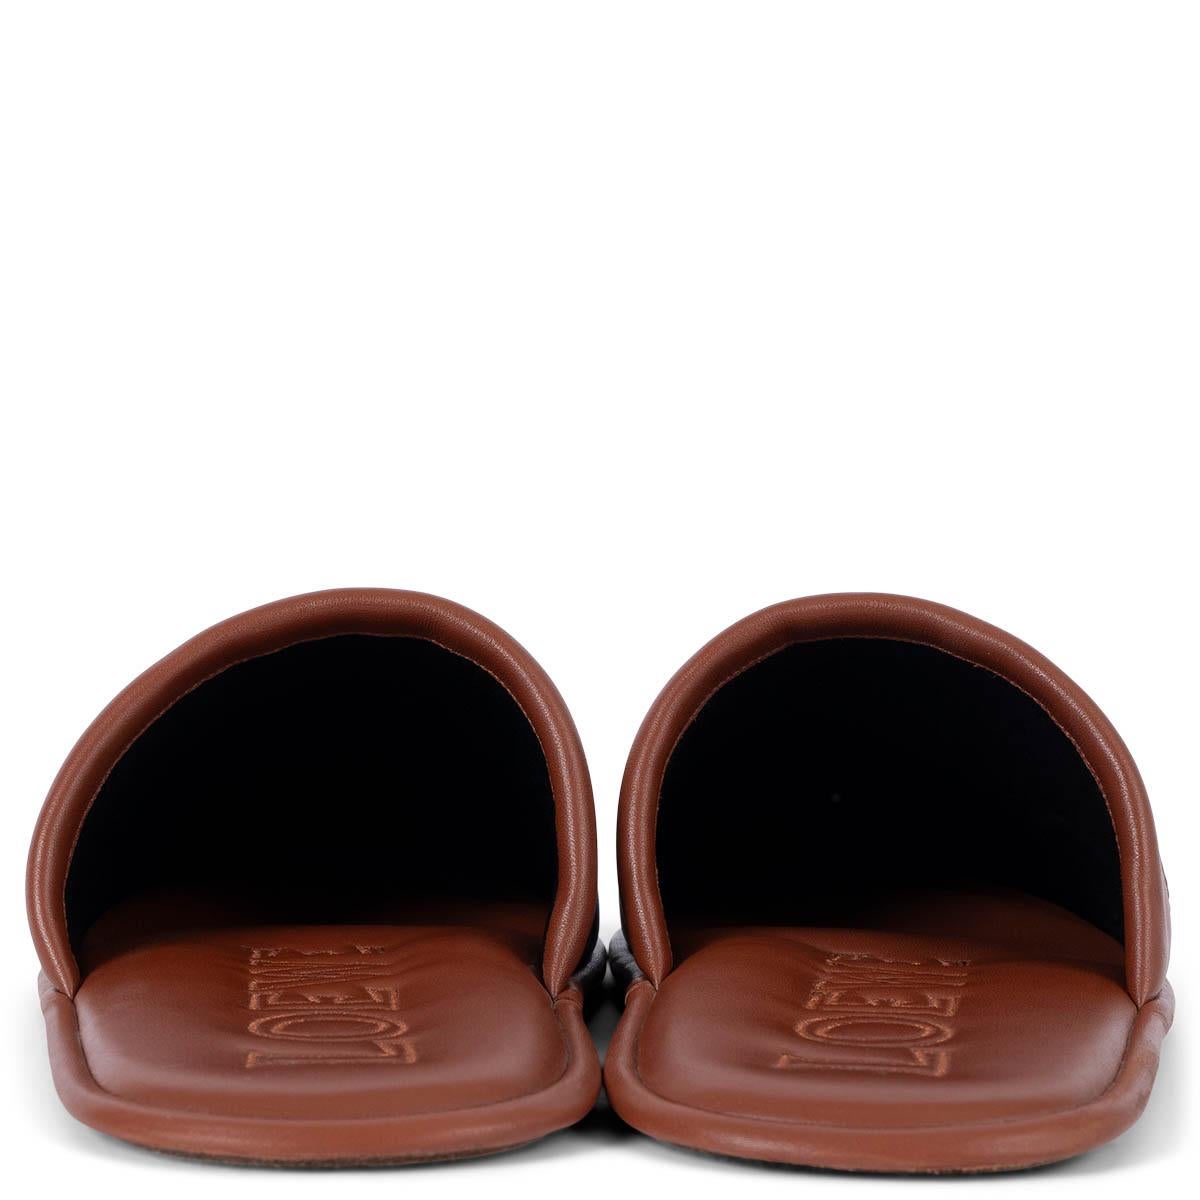 Women's LOEWE cognac leather LOGO EMBOSSED SLIPPERS Flats Shoes 39 fit 38.5 For Sale